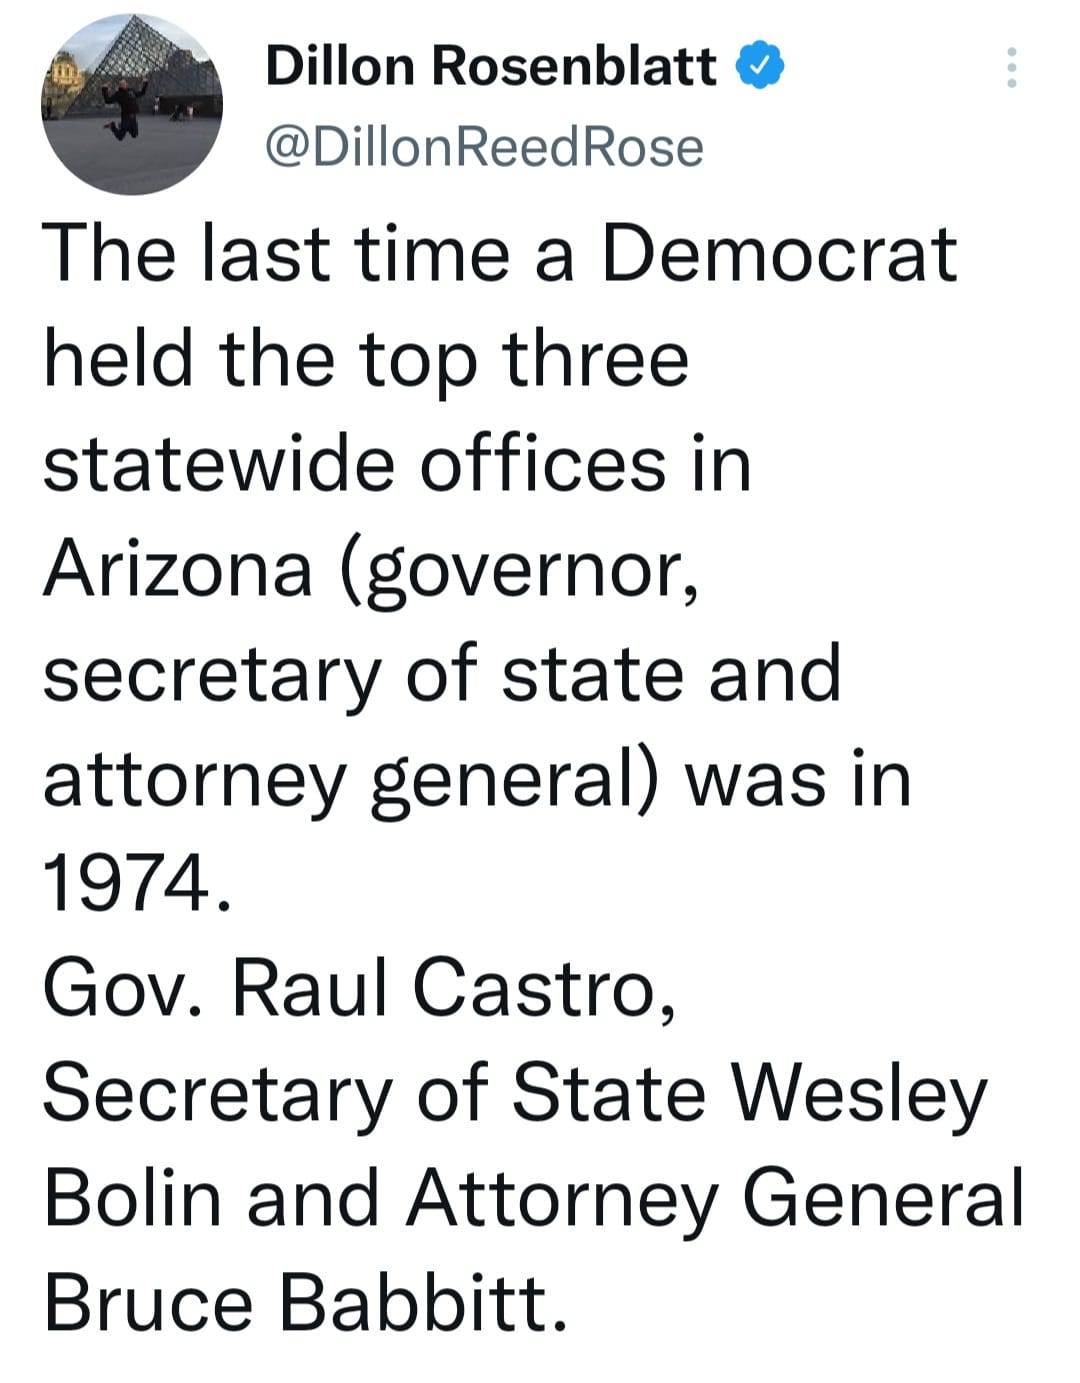 May be a Twitter screenshot of text that says 'Dillon Rosenblatt @DillonReedRose The last time a Democrat held the top three statewide offices in Arizona (governor, secretary of state and attorney general) was in 1974. Gov. Raul Castro, Secretary of State Wesley Bolin and Attorney General Bruce Babbitt.'